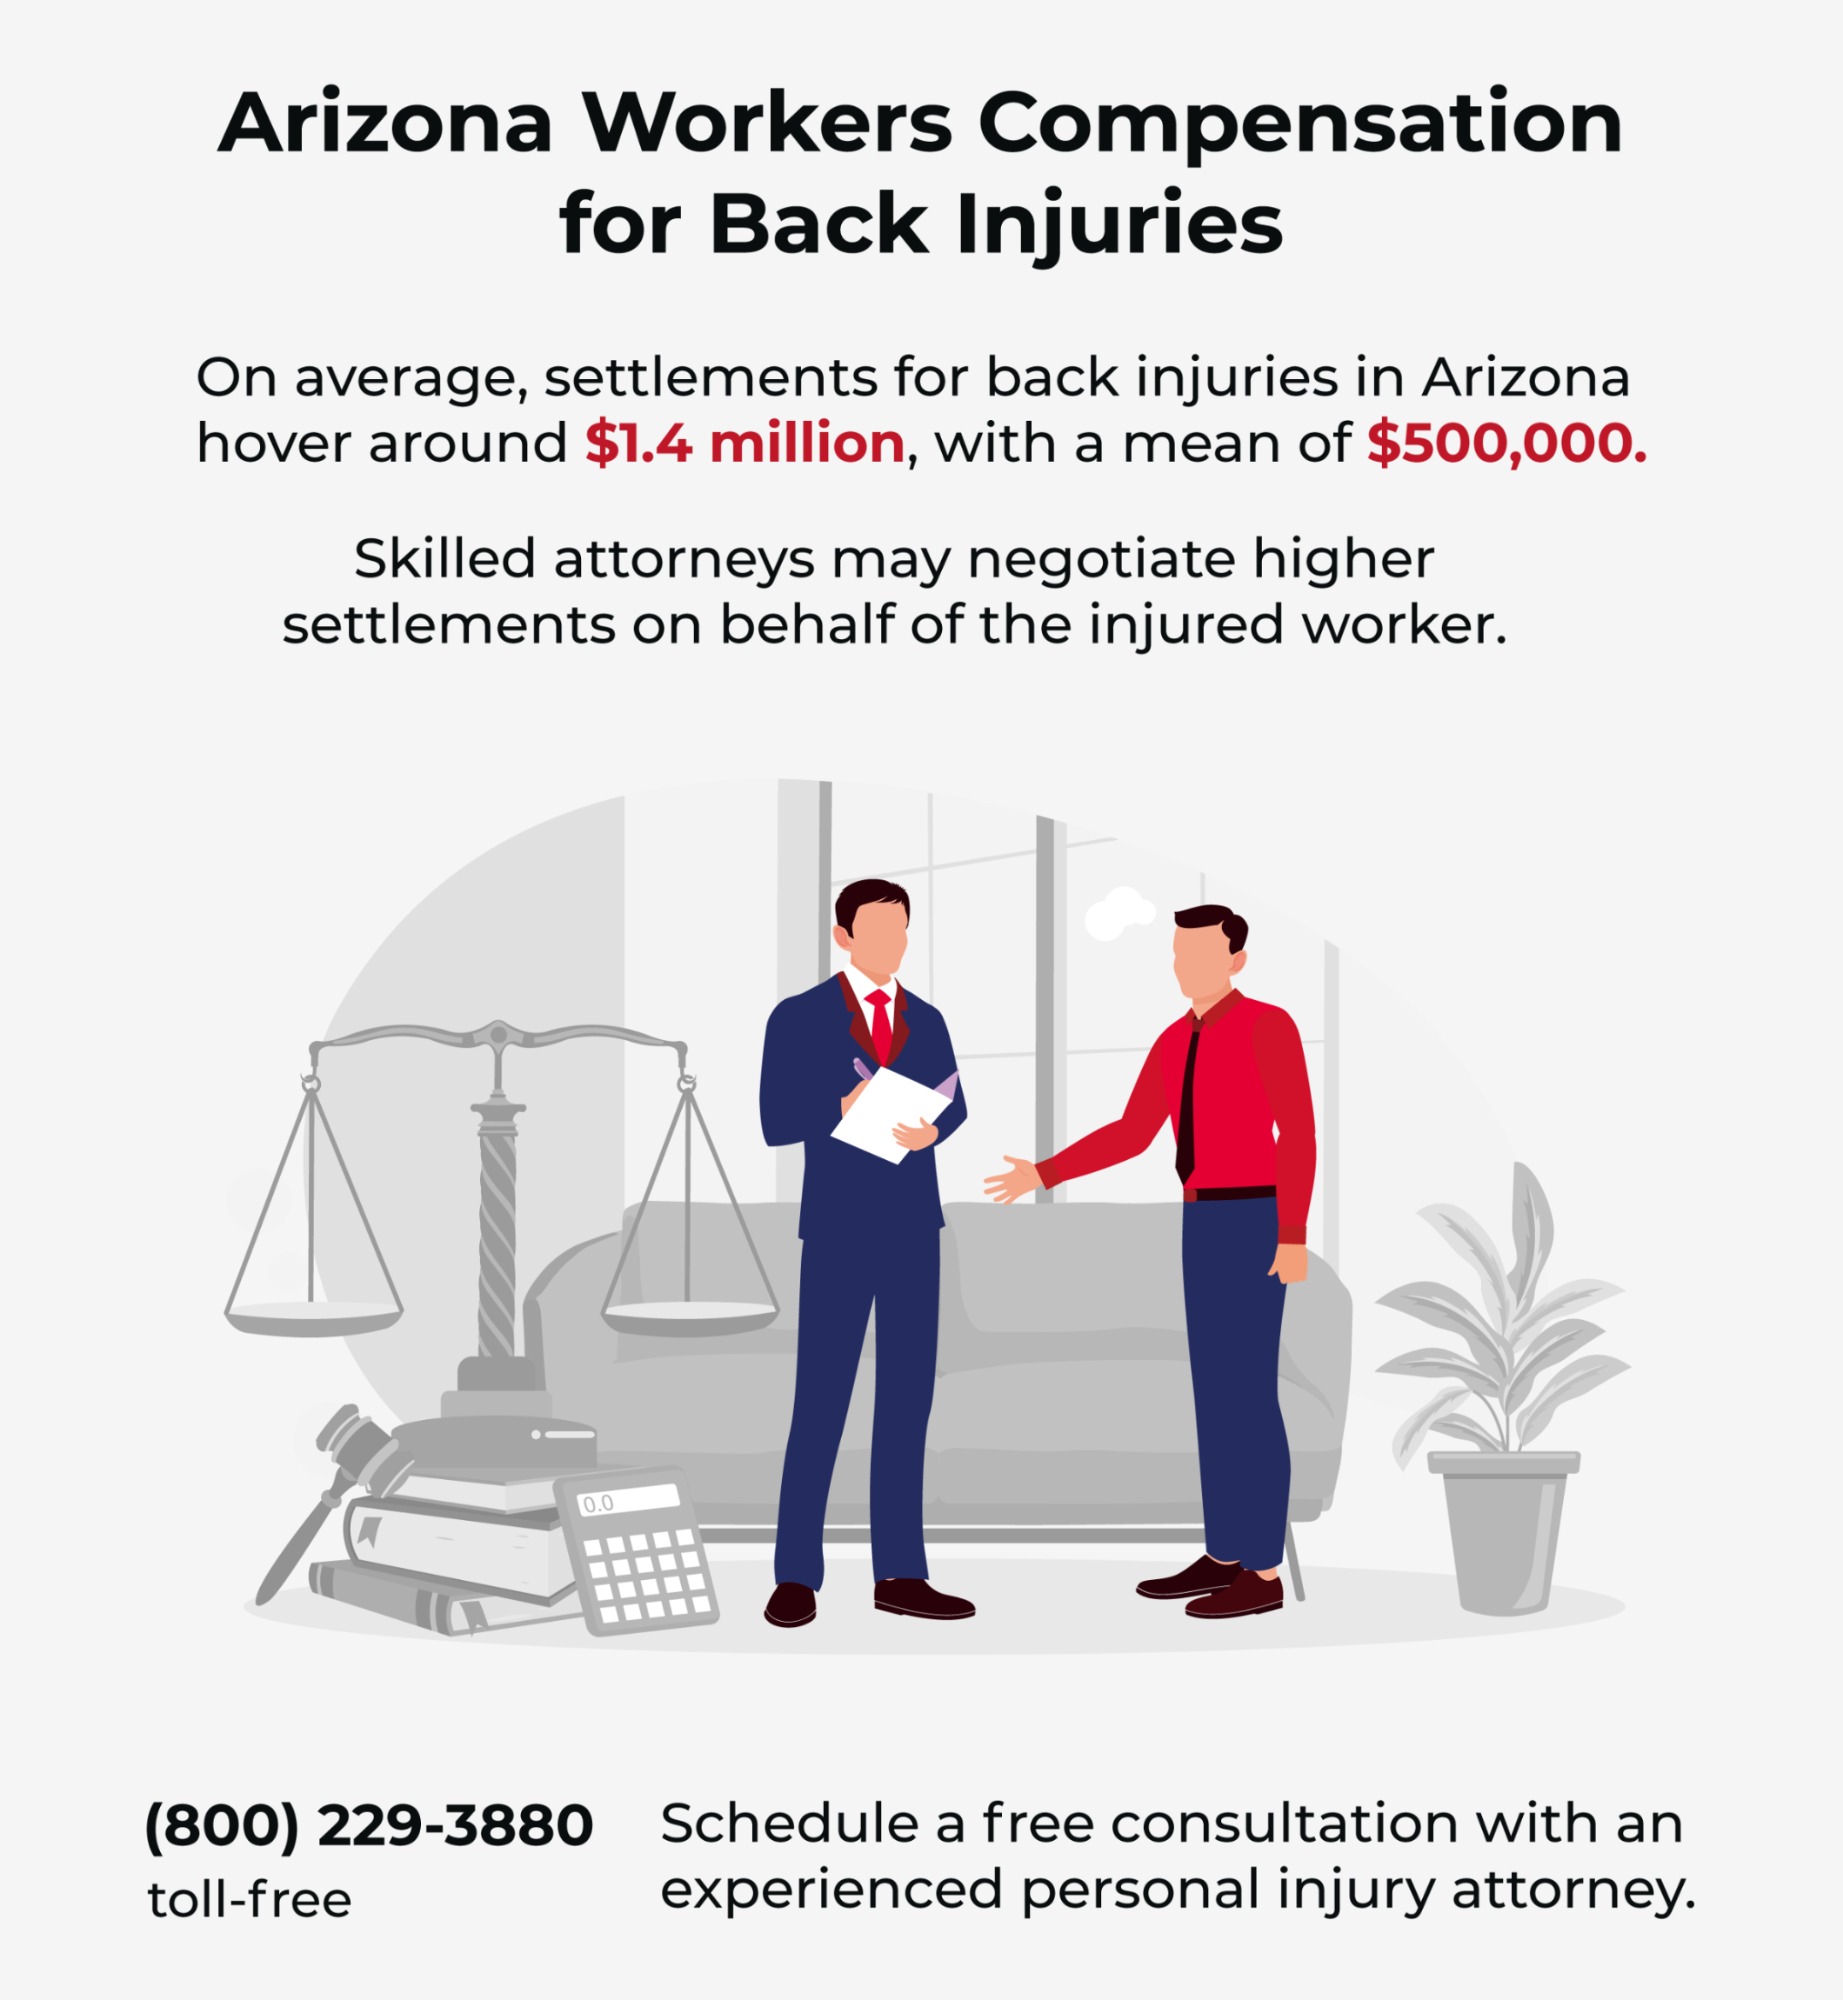 Arizona workers compensation for back injuries